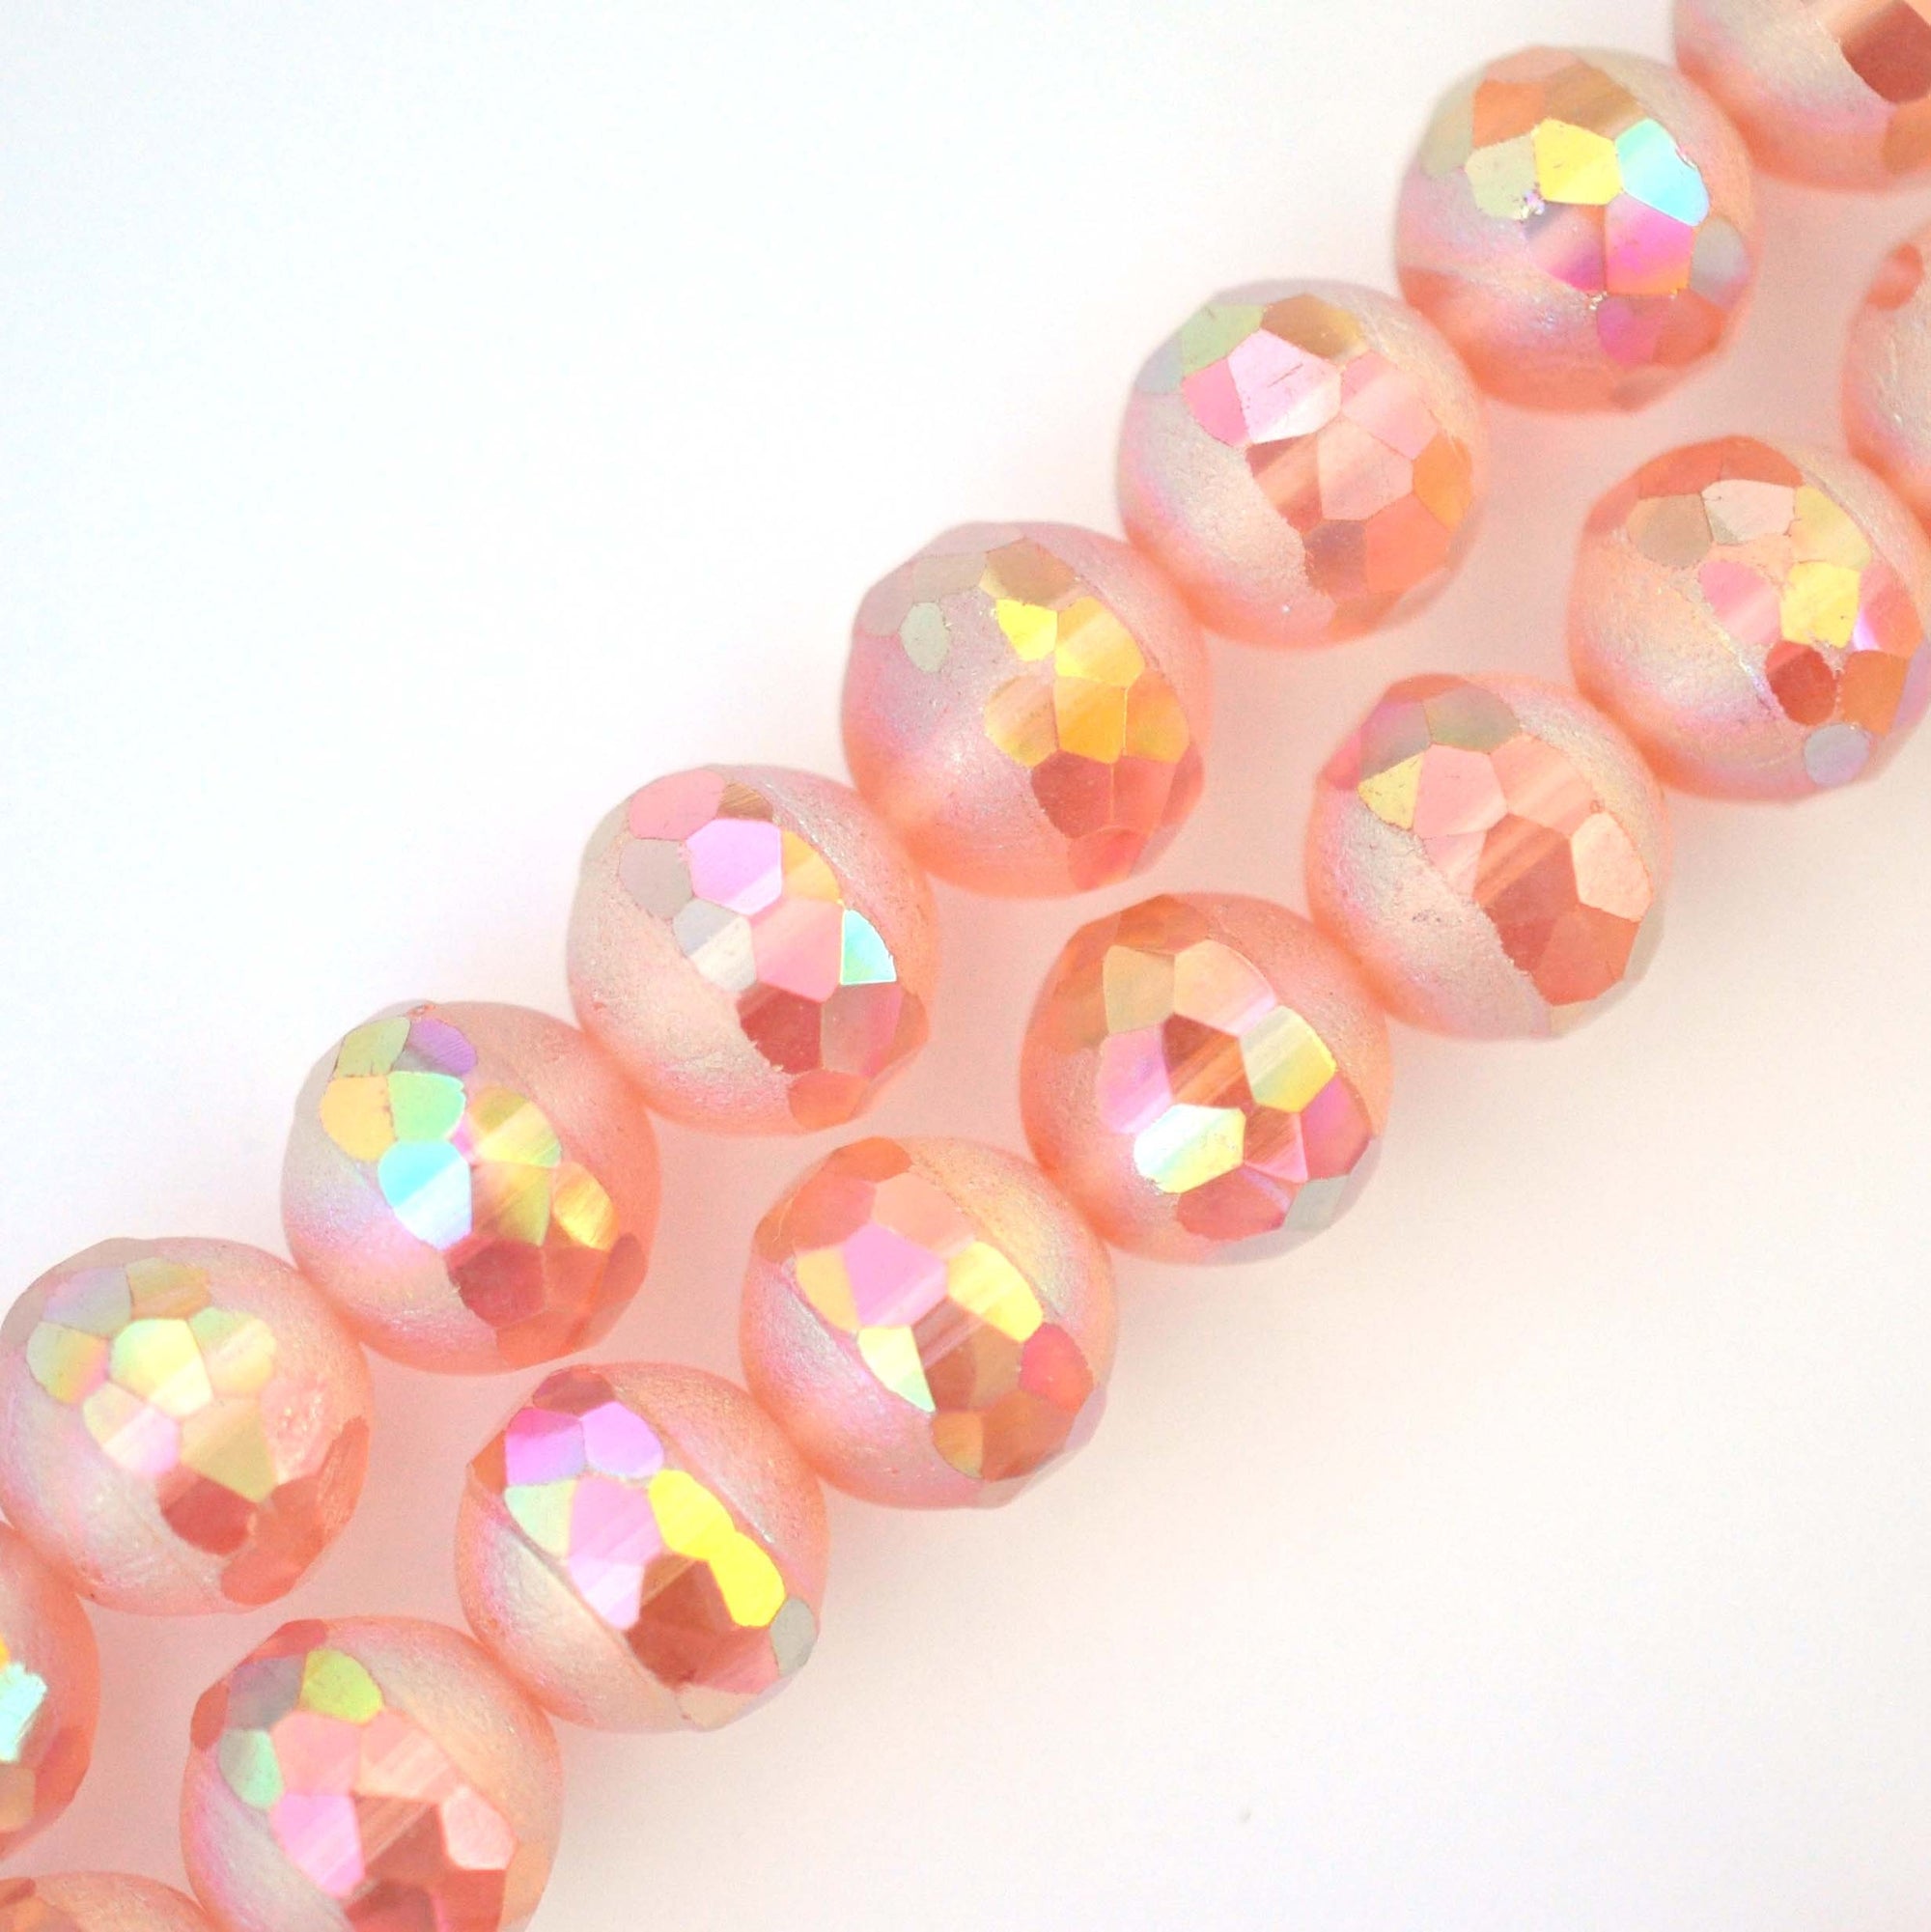 Pink Candy 13MM Round Faceted Shimmer Band Vintage Glass Beads - 6 Beads